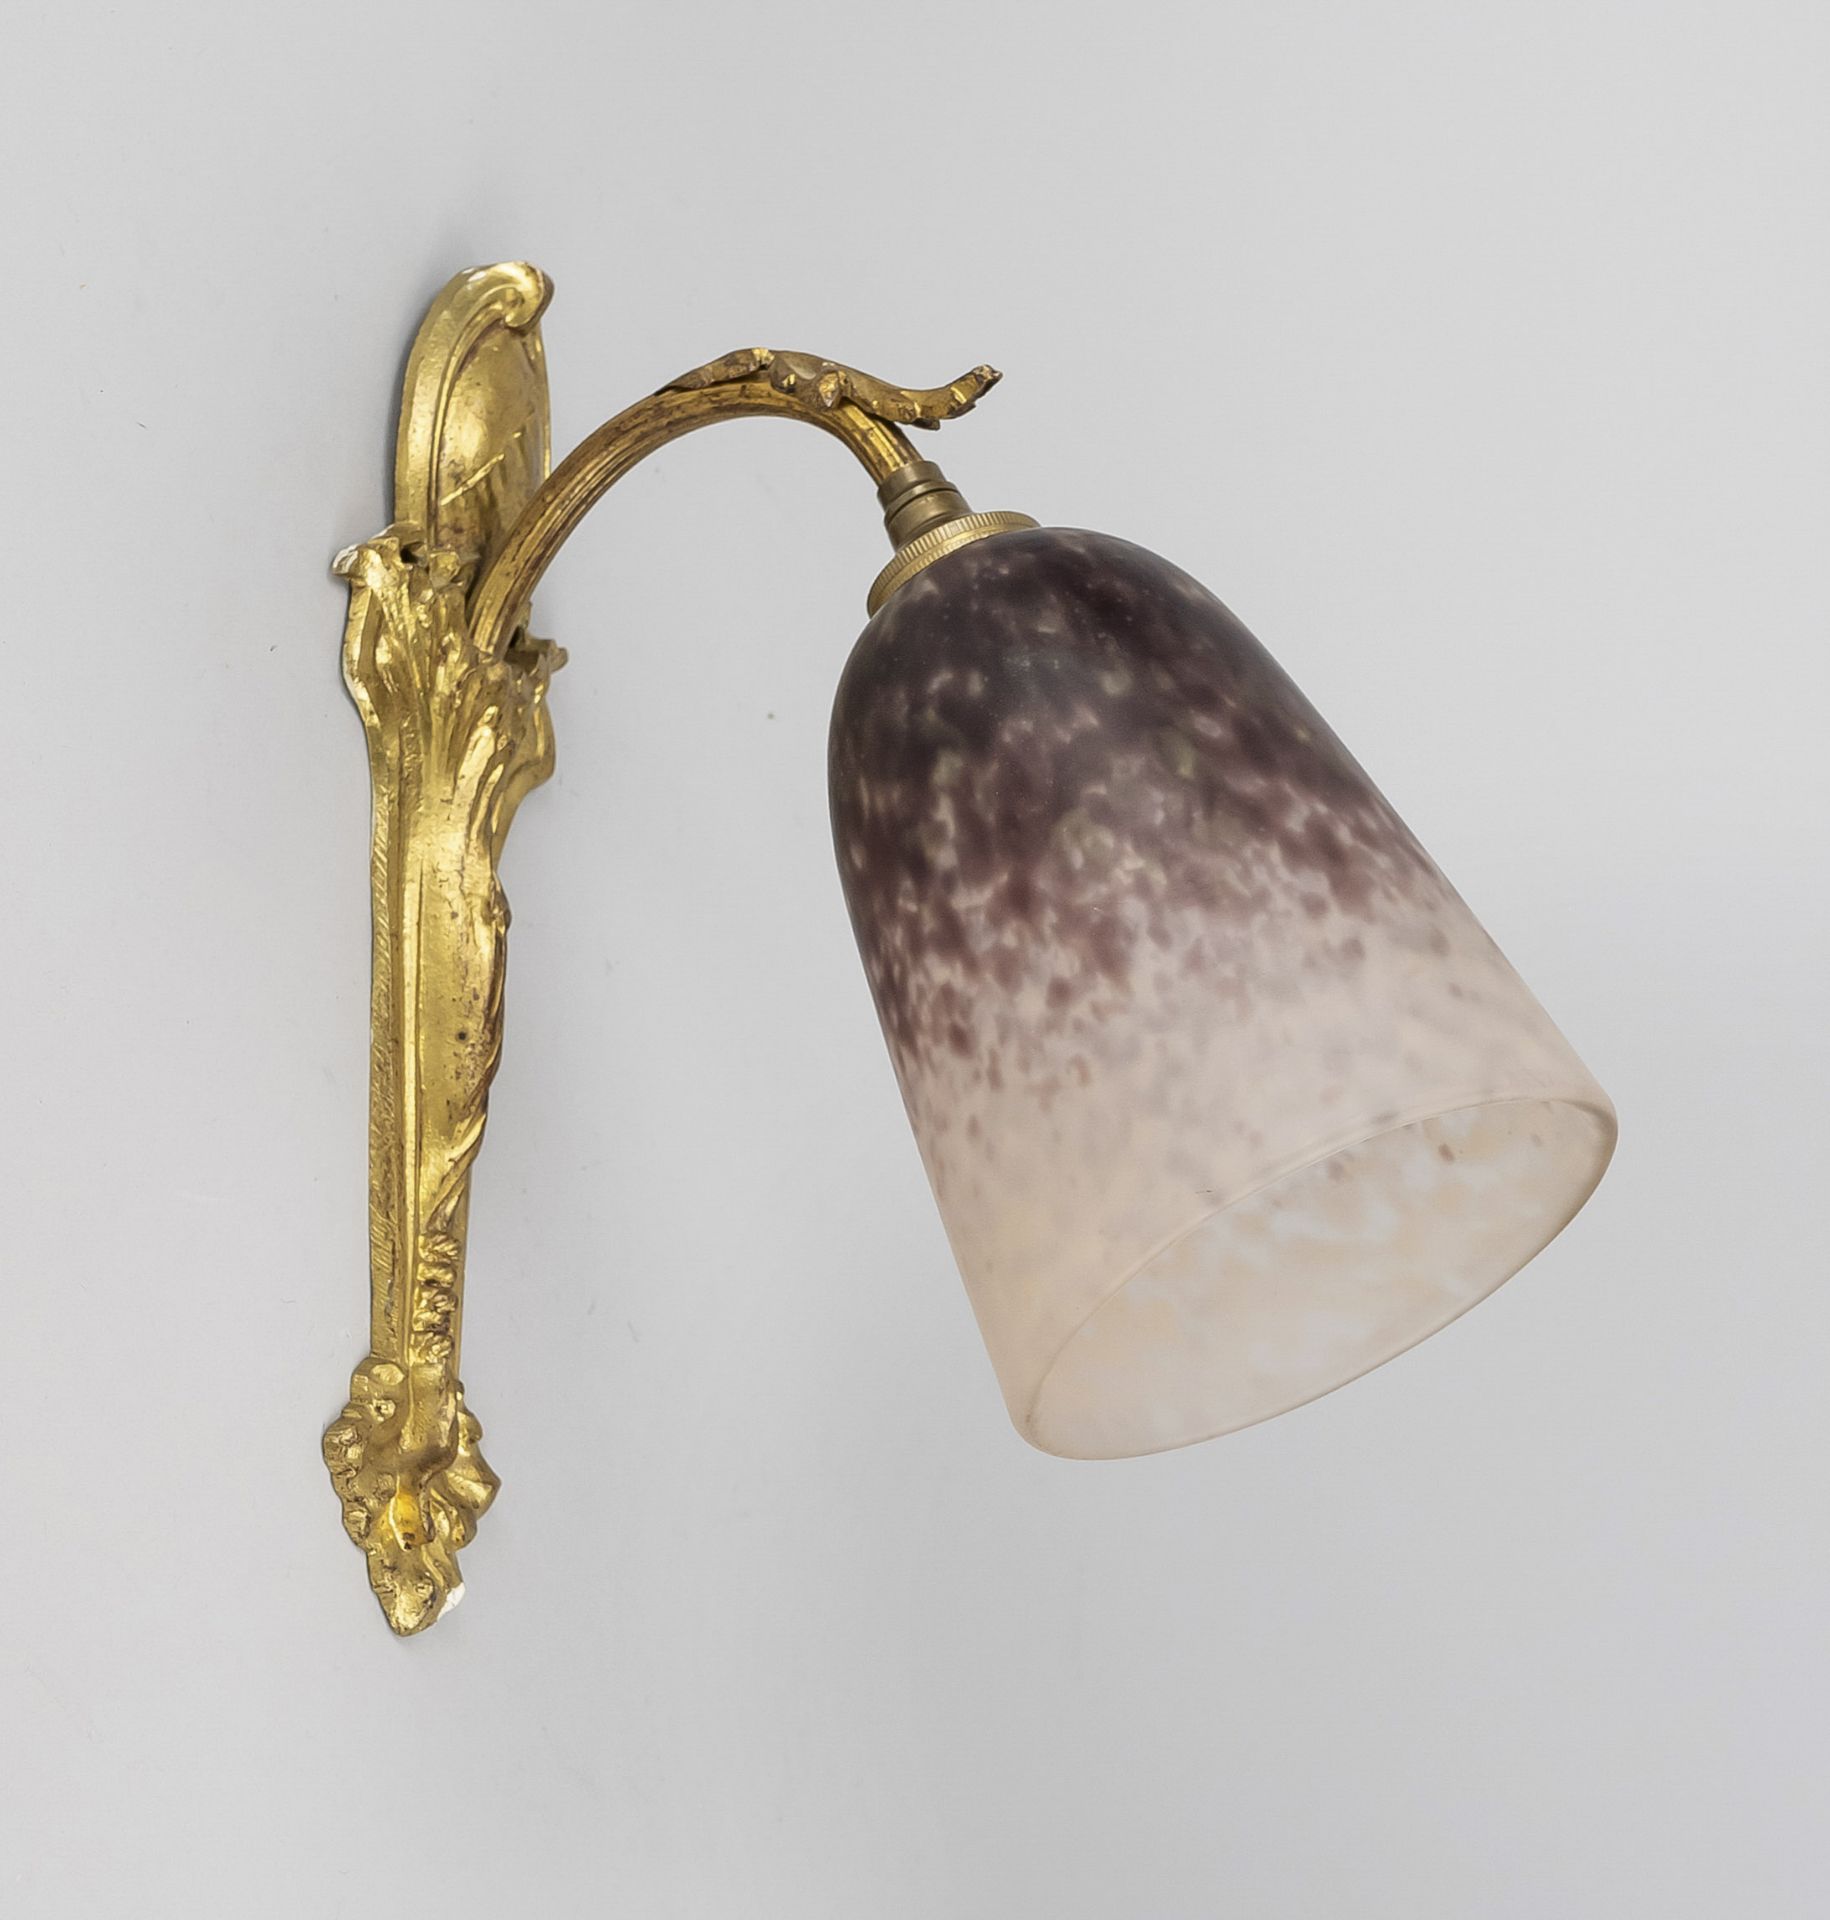 Wall lamp, Schneider, c. 1920, ornamented wall section with residual gilding, frosted glass